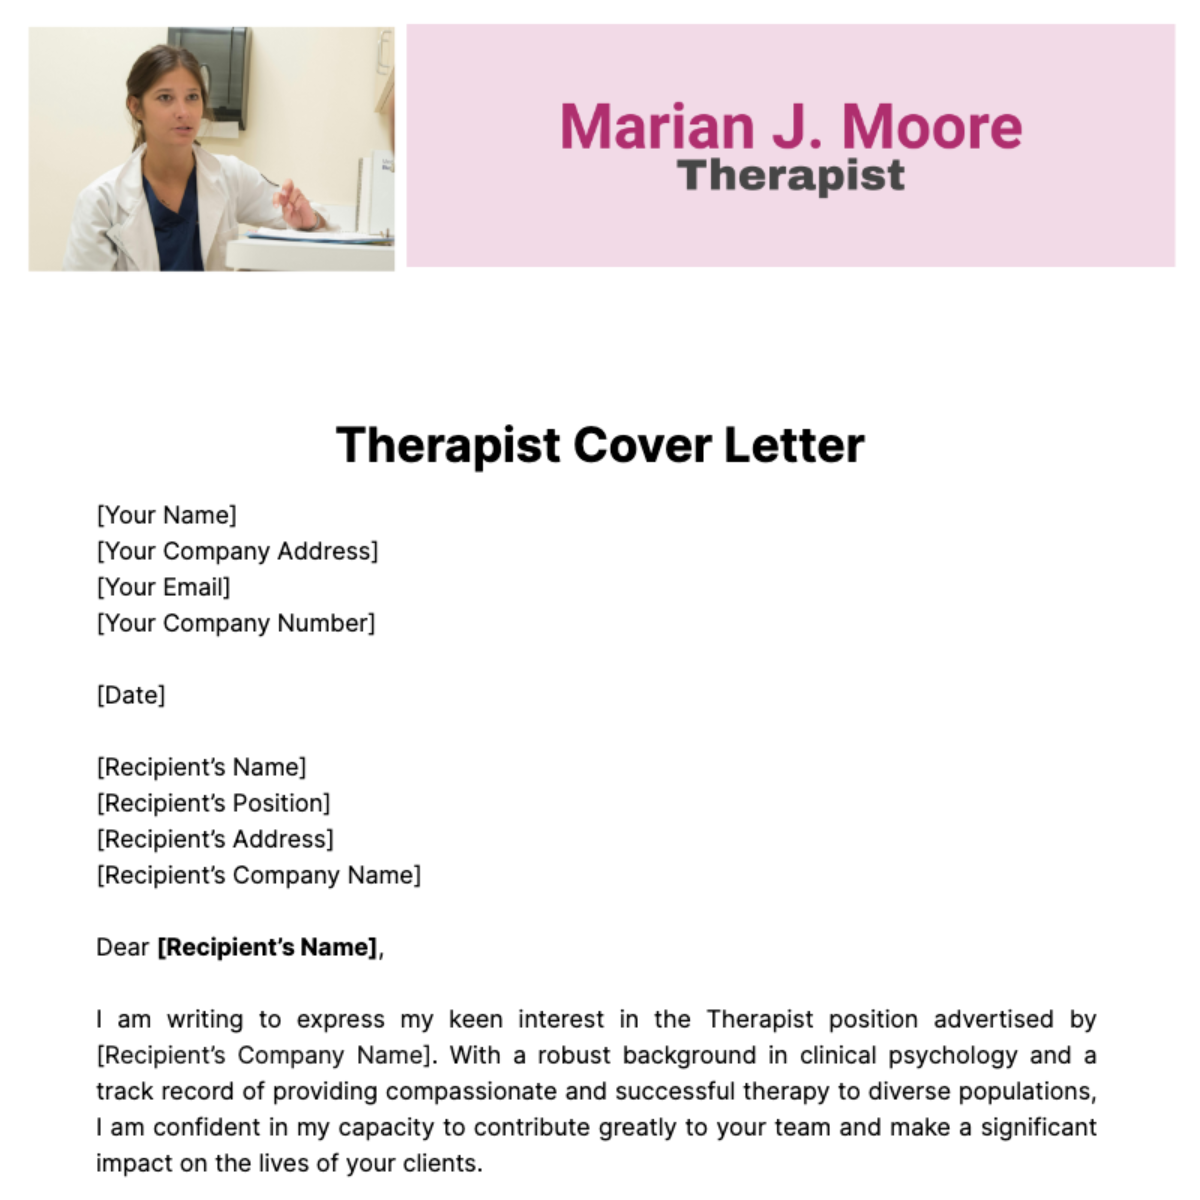 Therapist Cover Letter Template - Edit Online & Download Example ...